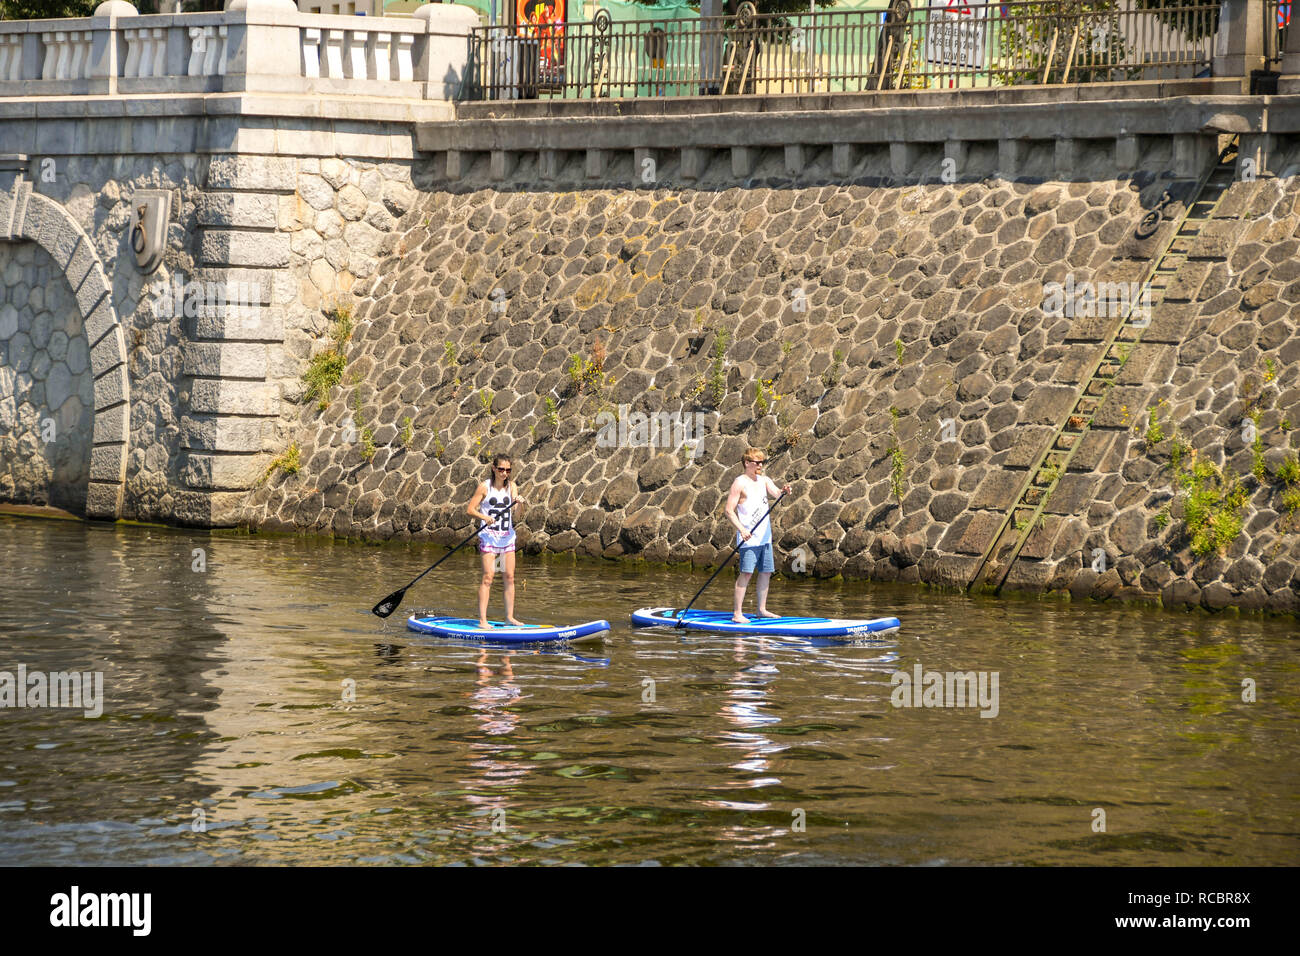 PRAGUE, CZECH REPUBLIC - JULY 2018: two people paddle boarding on the River Vltava in Prague. Stock Photo